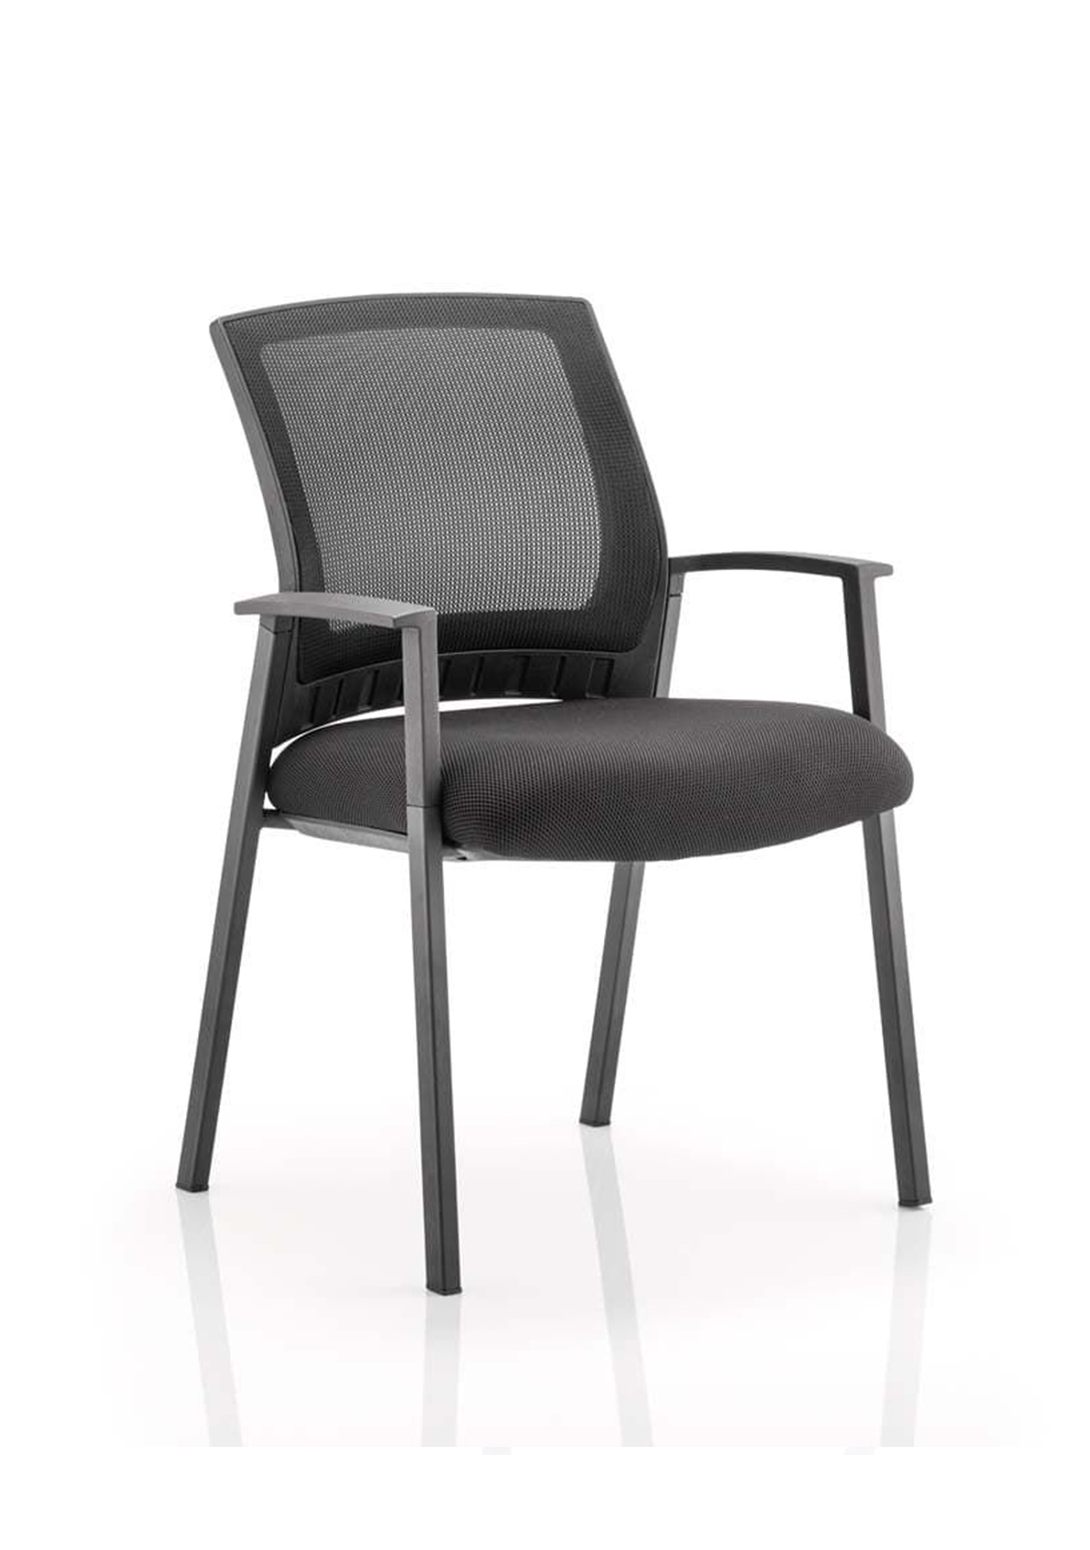 Metro Visitor Chair Black Fabric Black Mesh Back With Arms